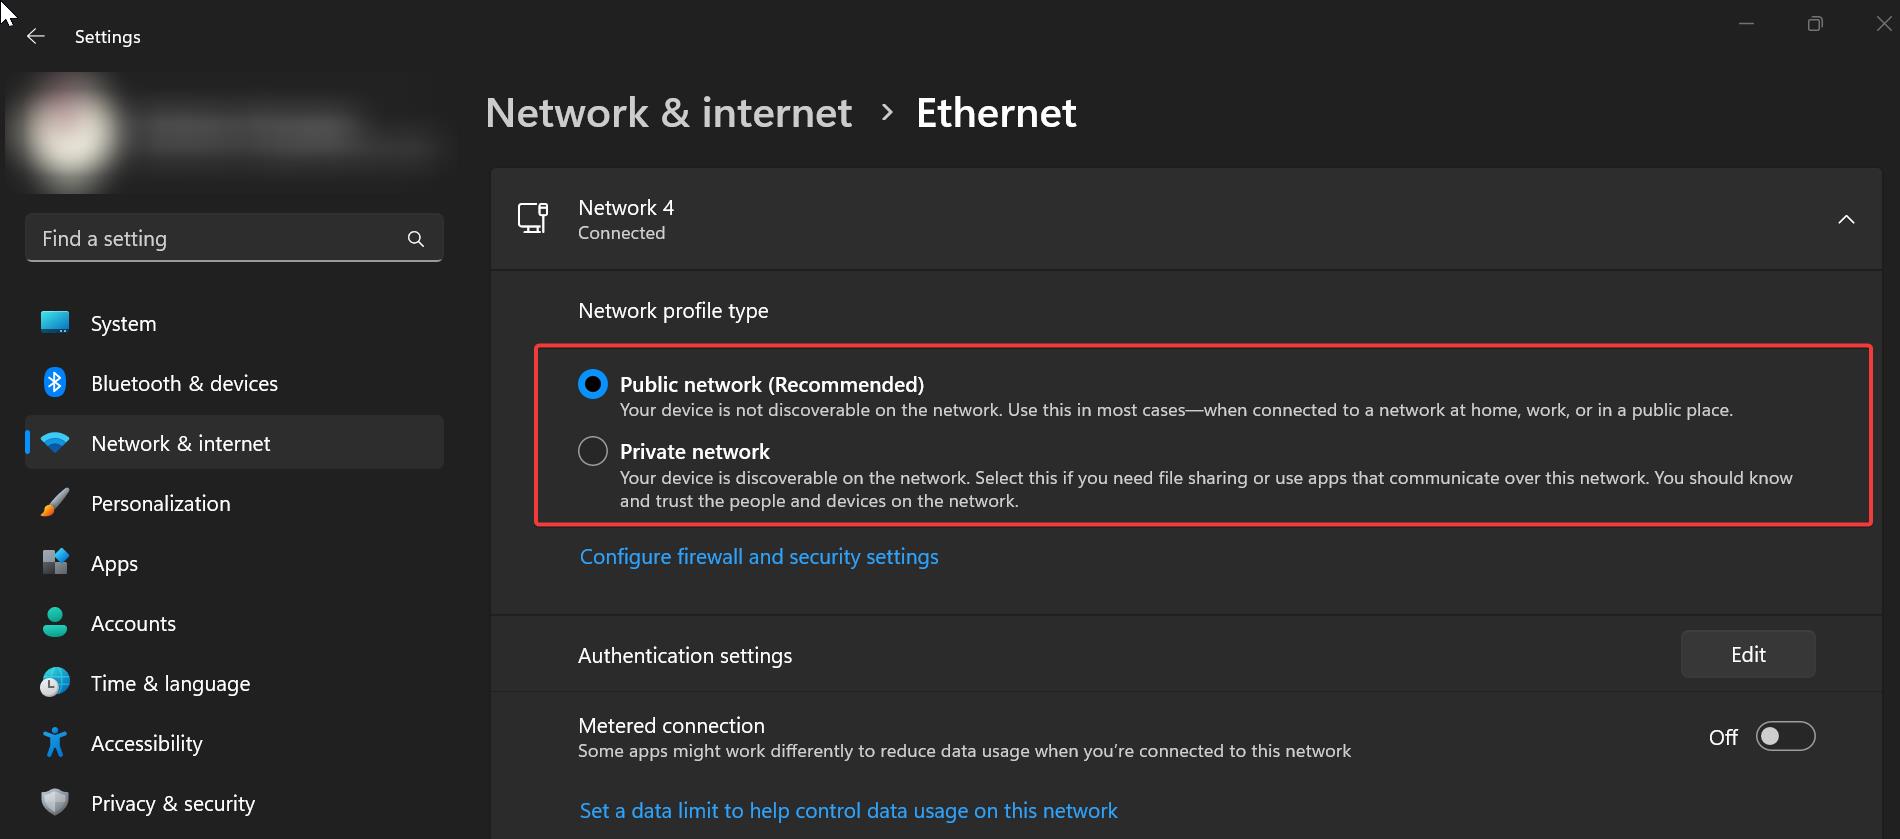 Change the Network Profile type using settings